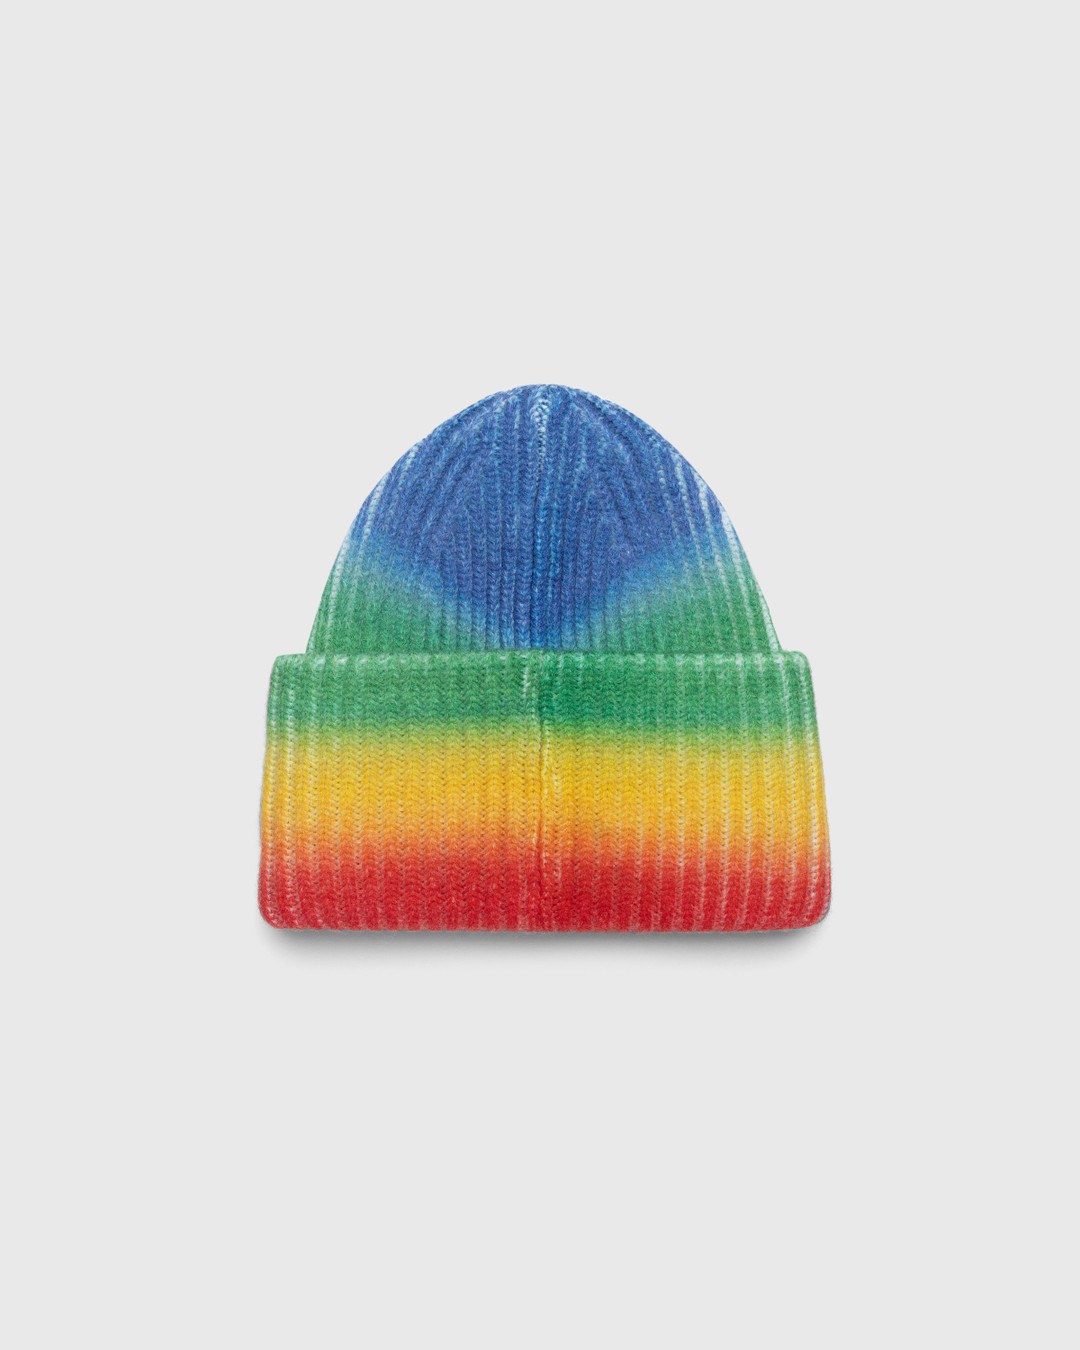 Acne Studios – Knit Face Patch Beanie Coral Red/Green - Beanies - Multi - Image 2